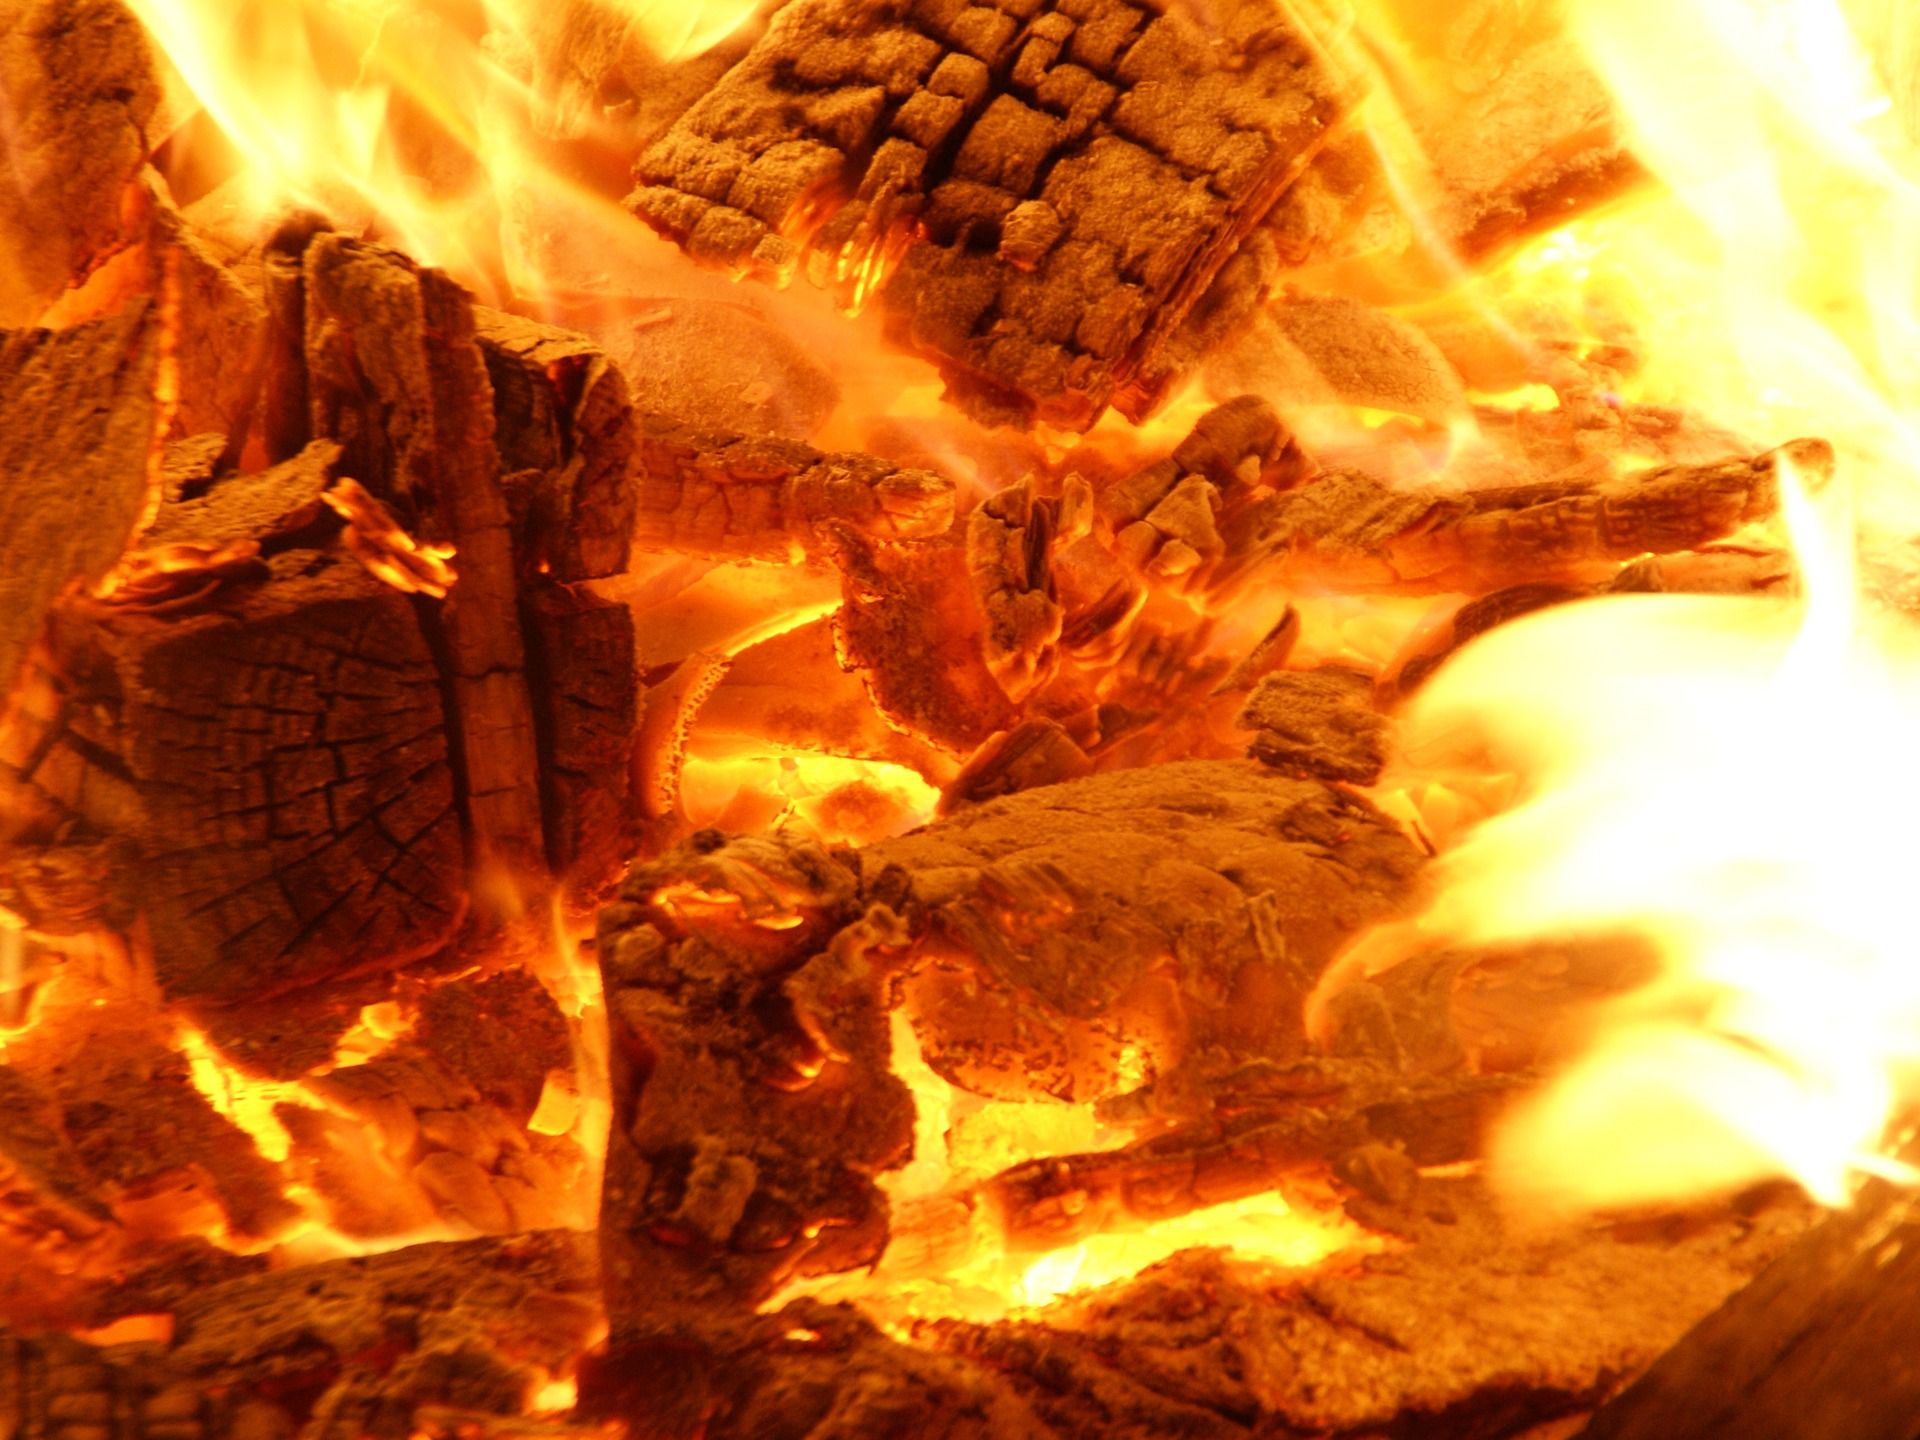 Wood Fire Wallpaper Other Nature. Fire image, Earth on fire, Nature wallpaper